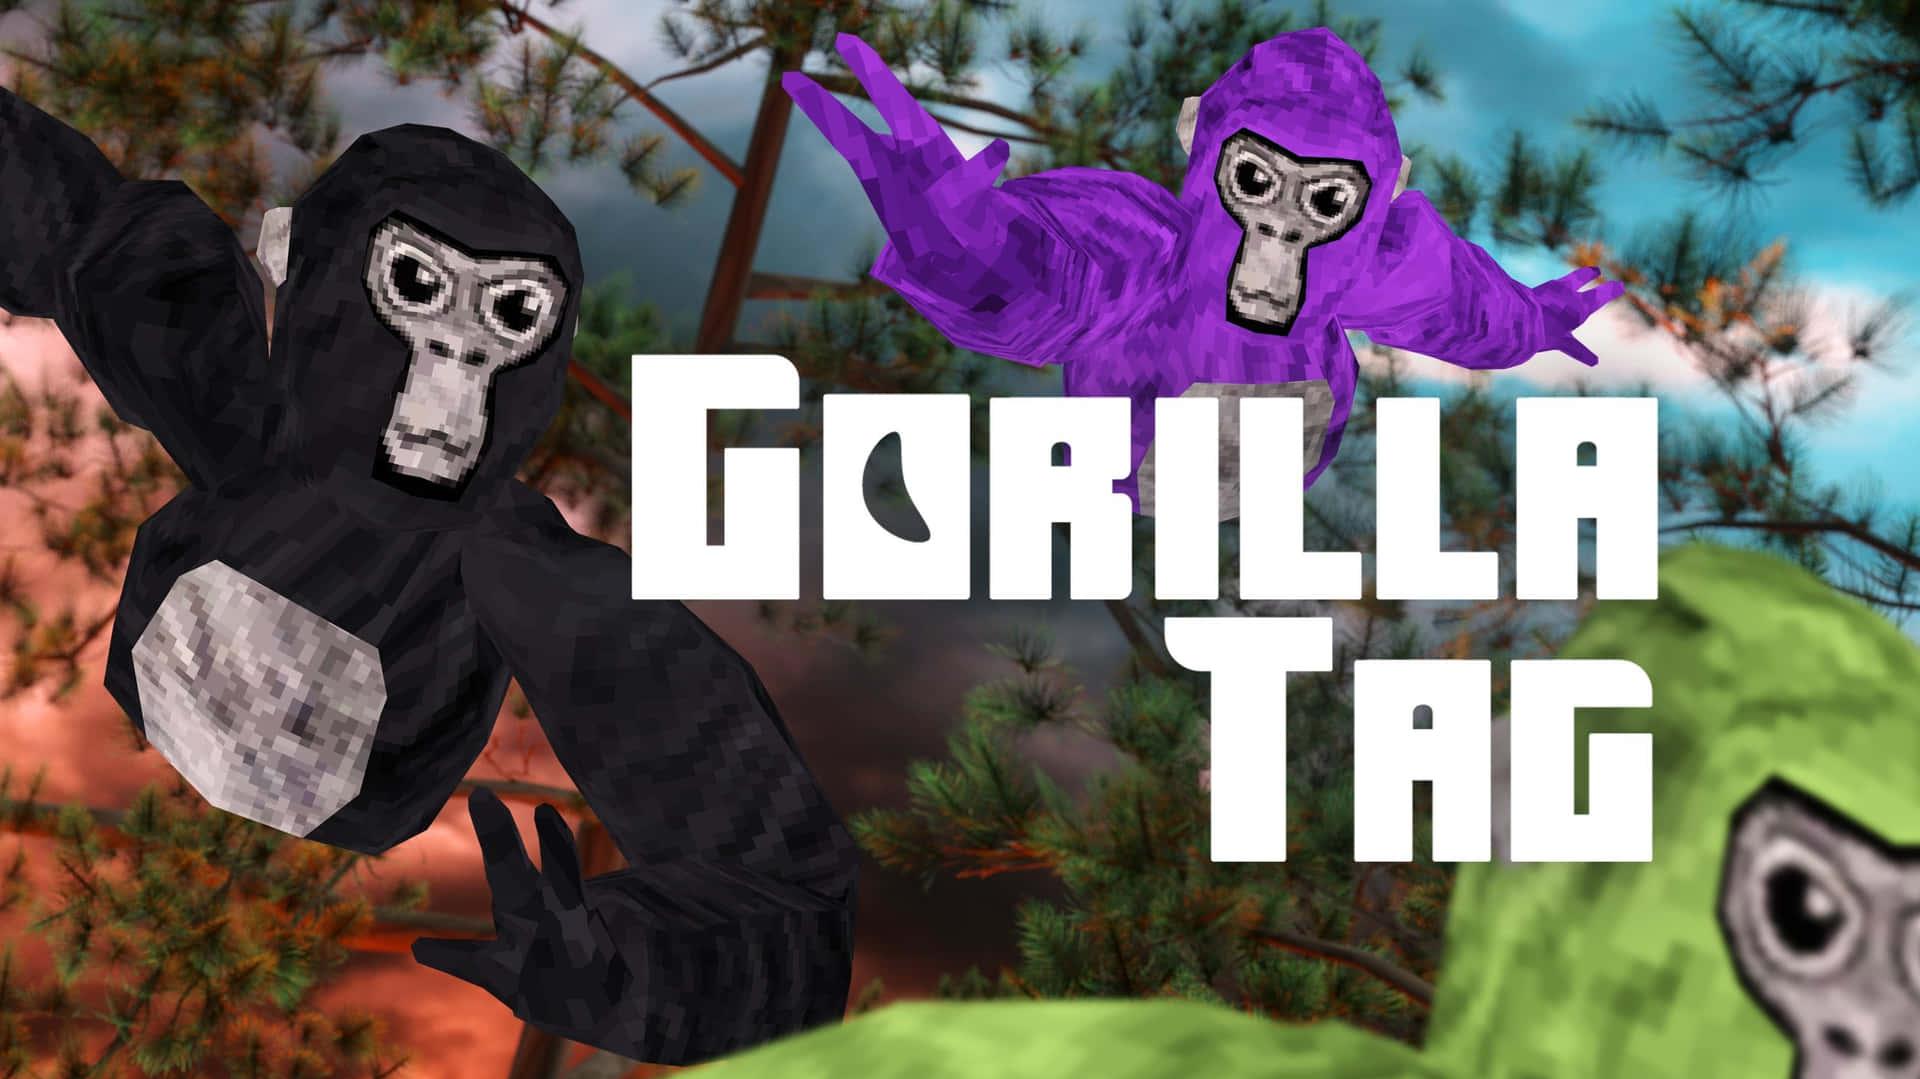 Gorilla Tag Pictures For